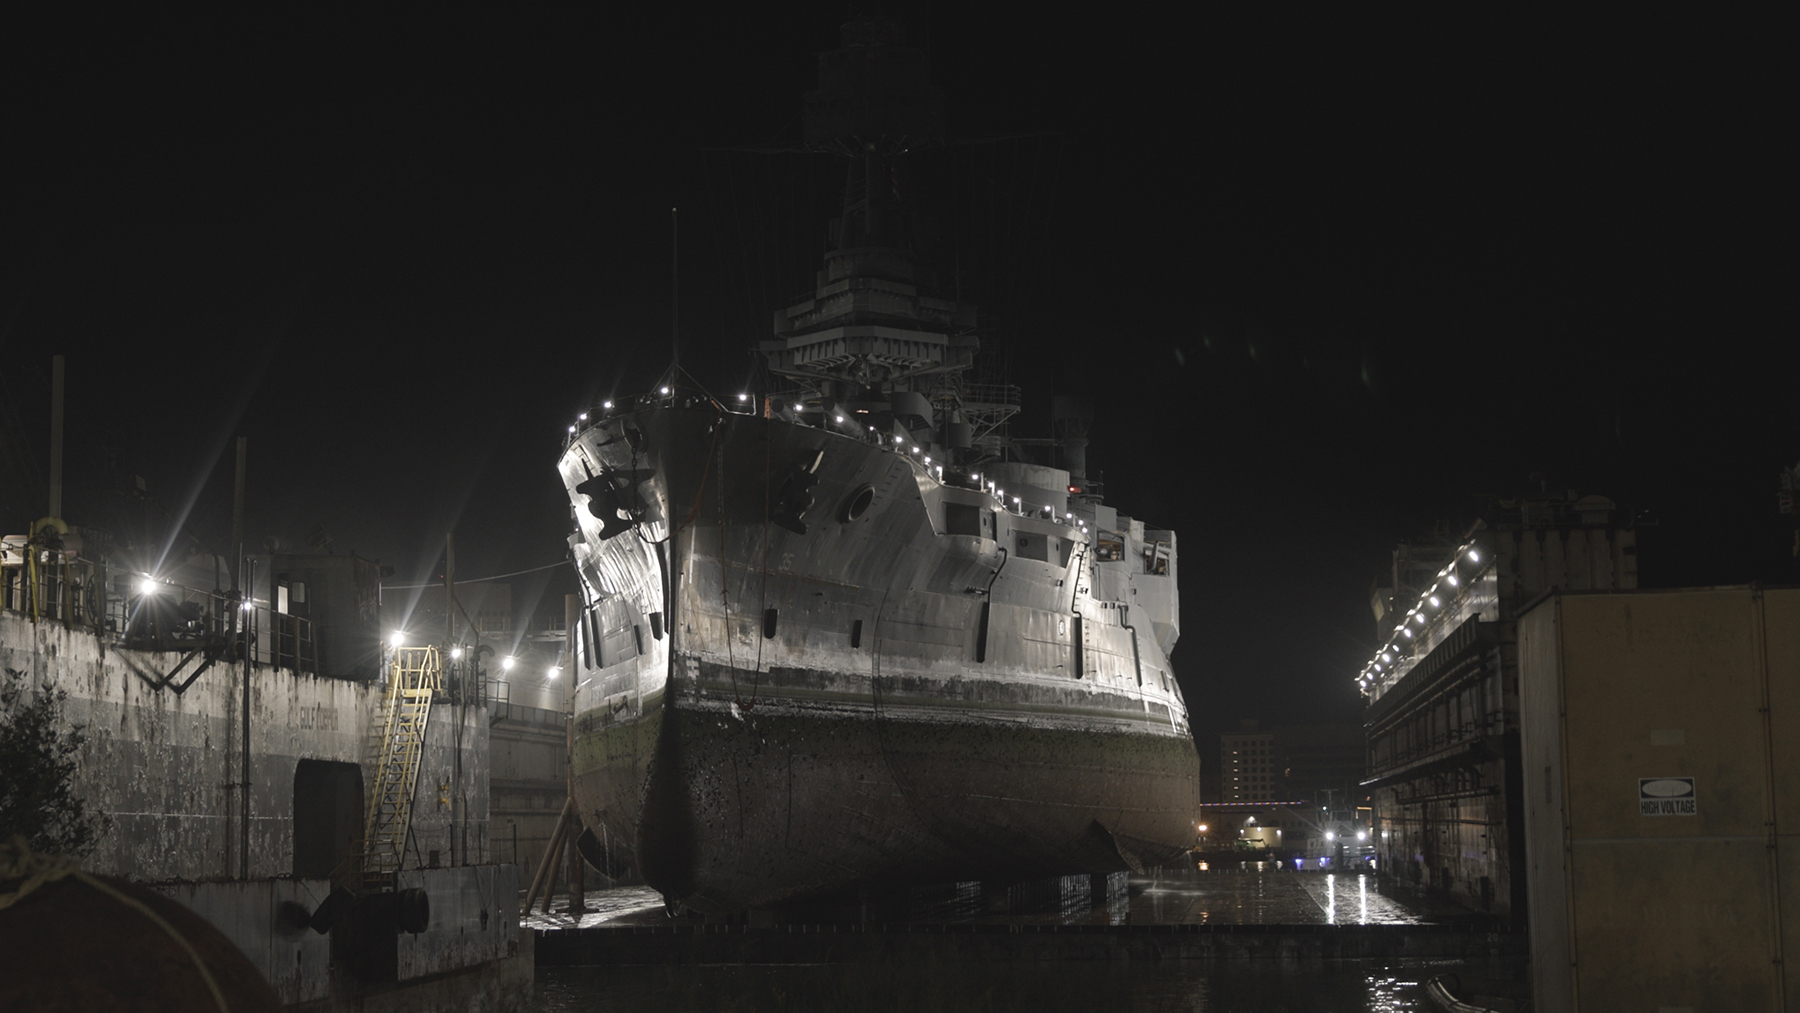 The Texas is now in dry dock, undergoing repairs designed to preserve the ship for another 50 or even 100 years. (Image courtesy of Captiv Creative) 